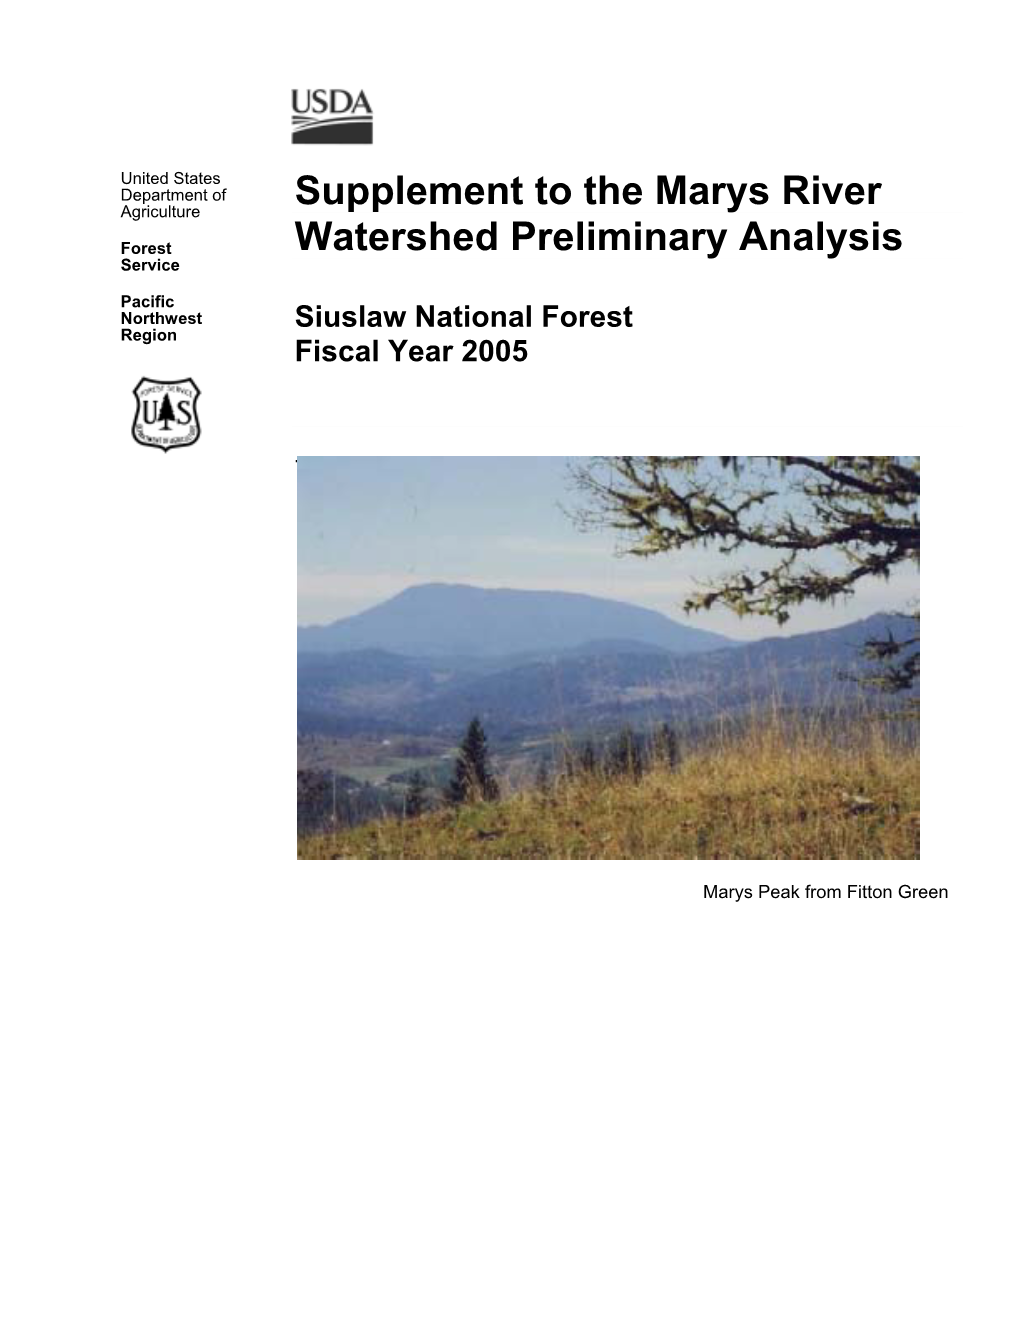 Supplement to the Marys River Watershed Preliminary Analysis